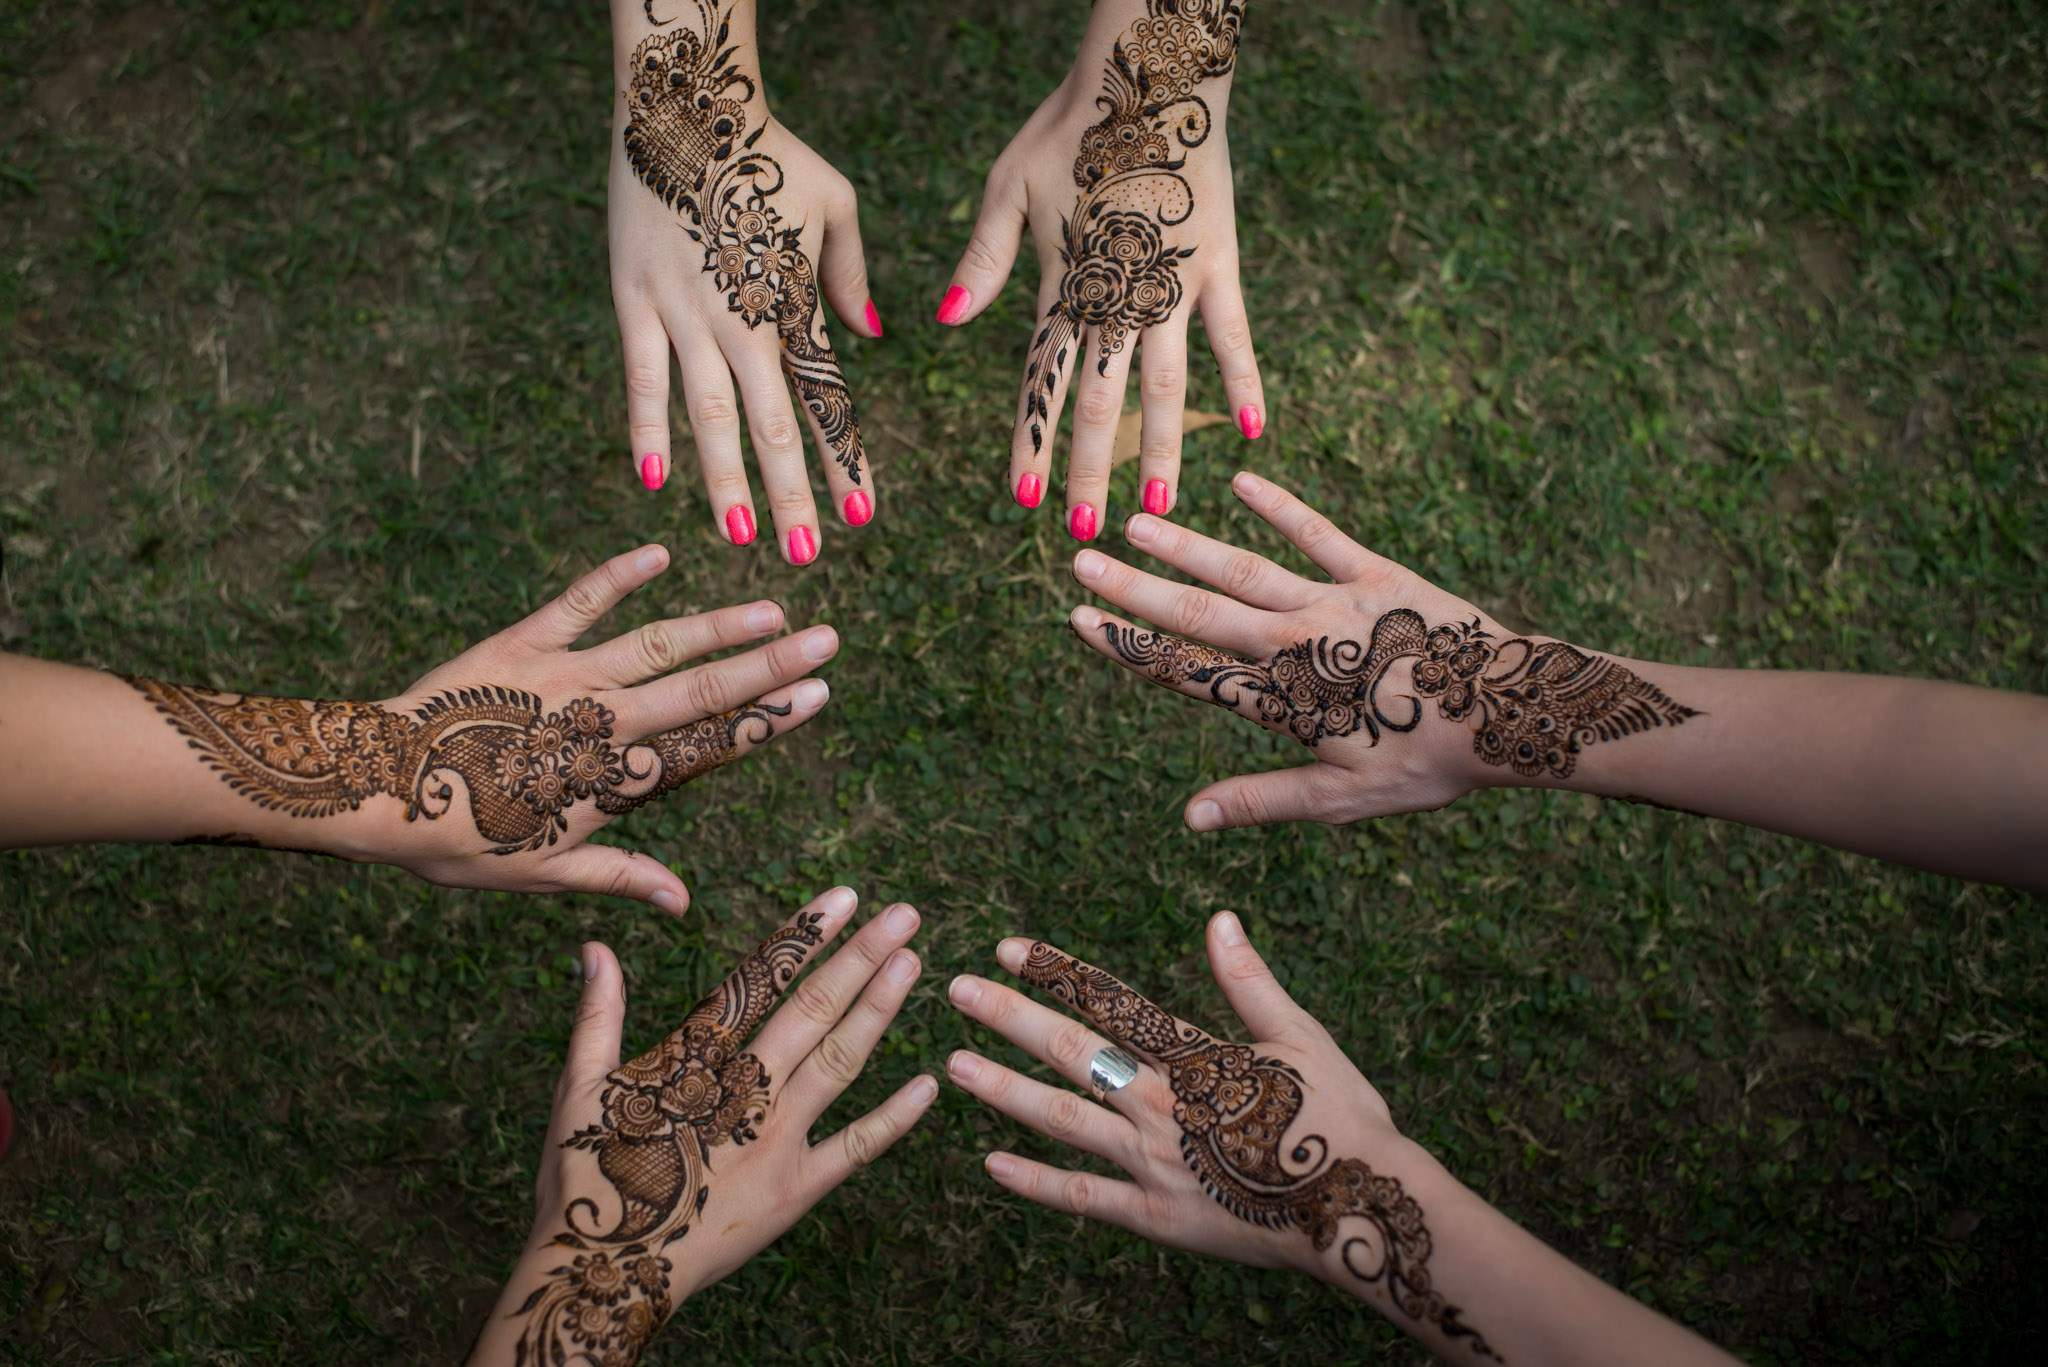 Hands full with Henna